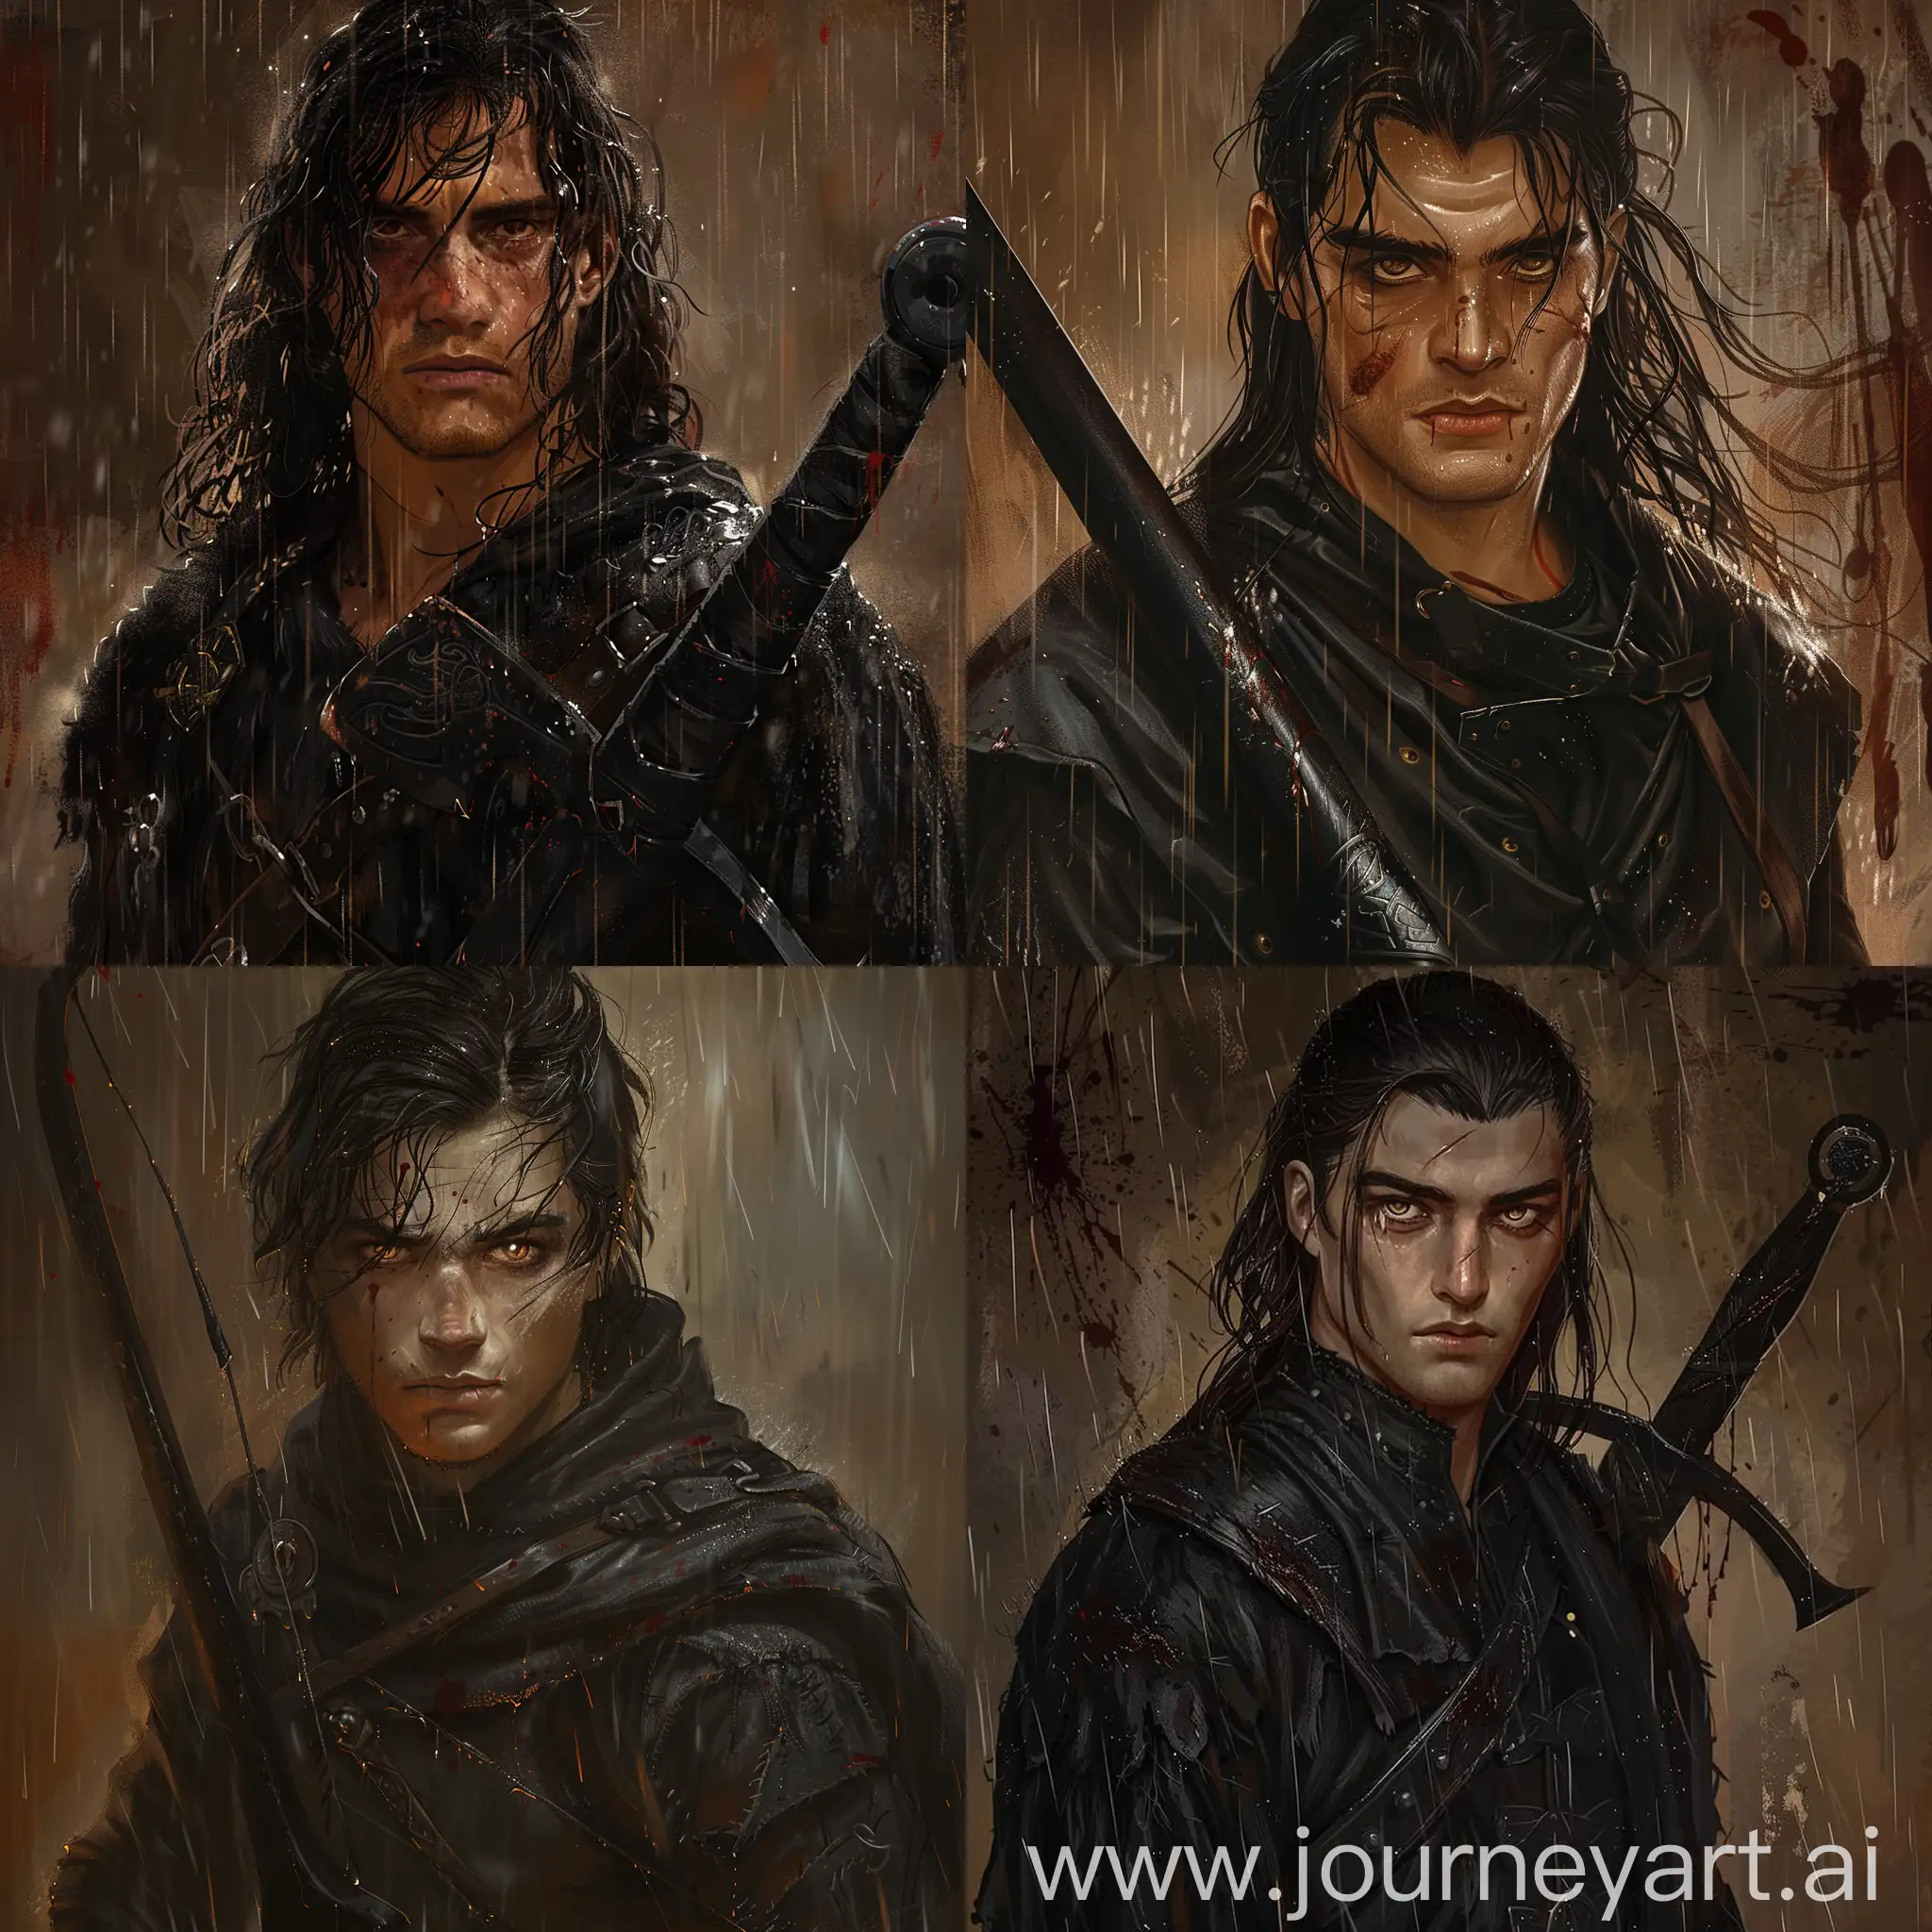 Slightly swarthy, dark-haired and brown-eyed Viking dressed in a special all-black garment with a black weapon that shows traces of blows and blood. Historical realistic depiction of a Viking standing in a downpour. The Viking's gaze is directed at us, his eyes are slightly glowing and you can see confidence and aggression in his gaze. The background is a bit dark and brown, signifying bloodshed.